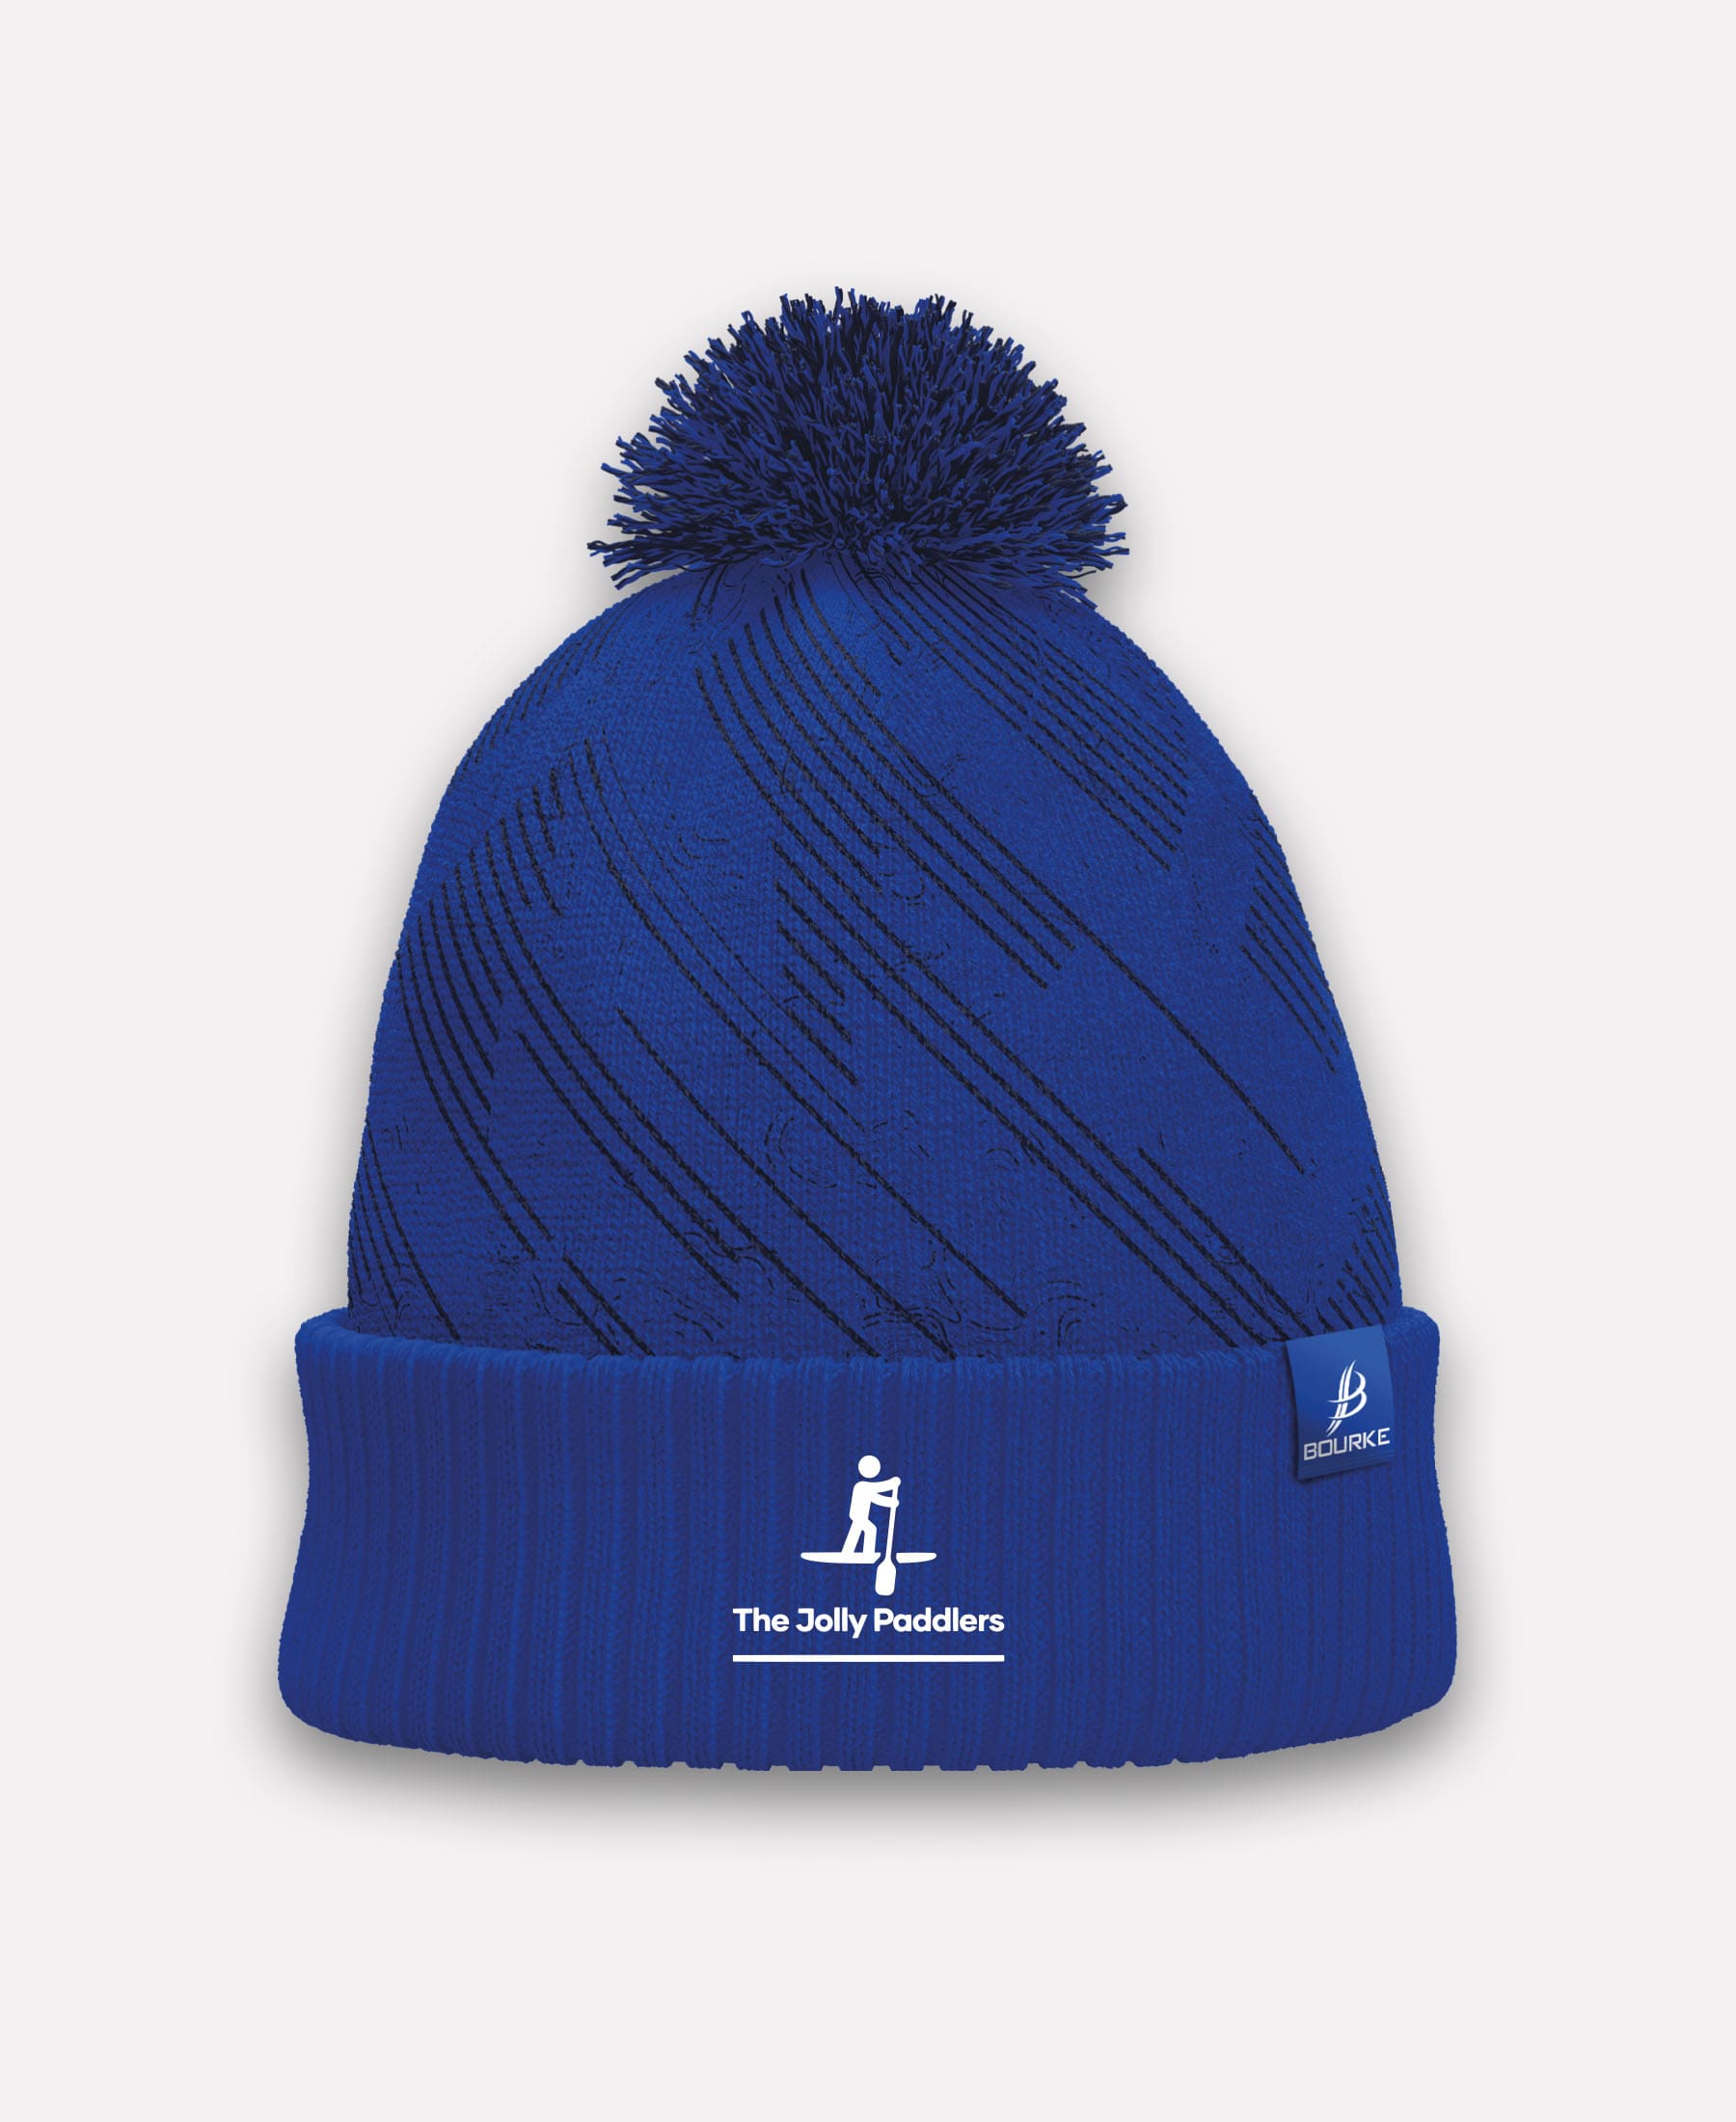 The Jolly Paddlers BARR Bobble Hat (Navy/Blue)